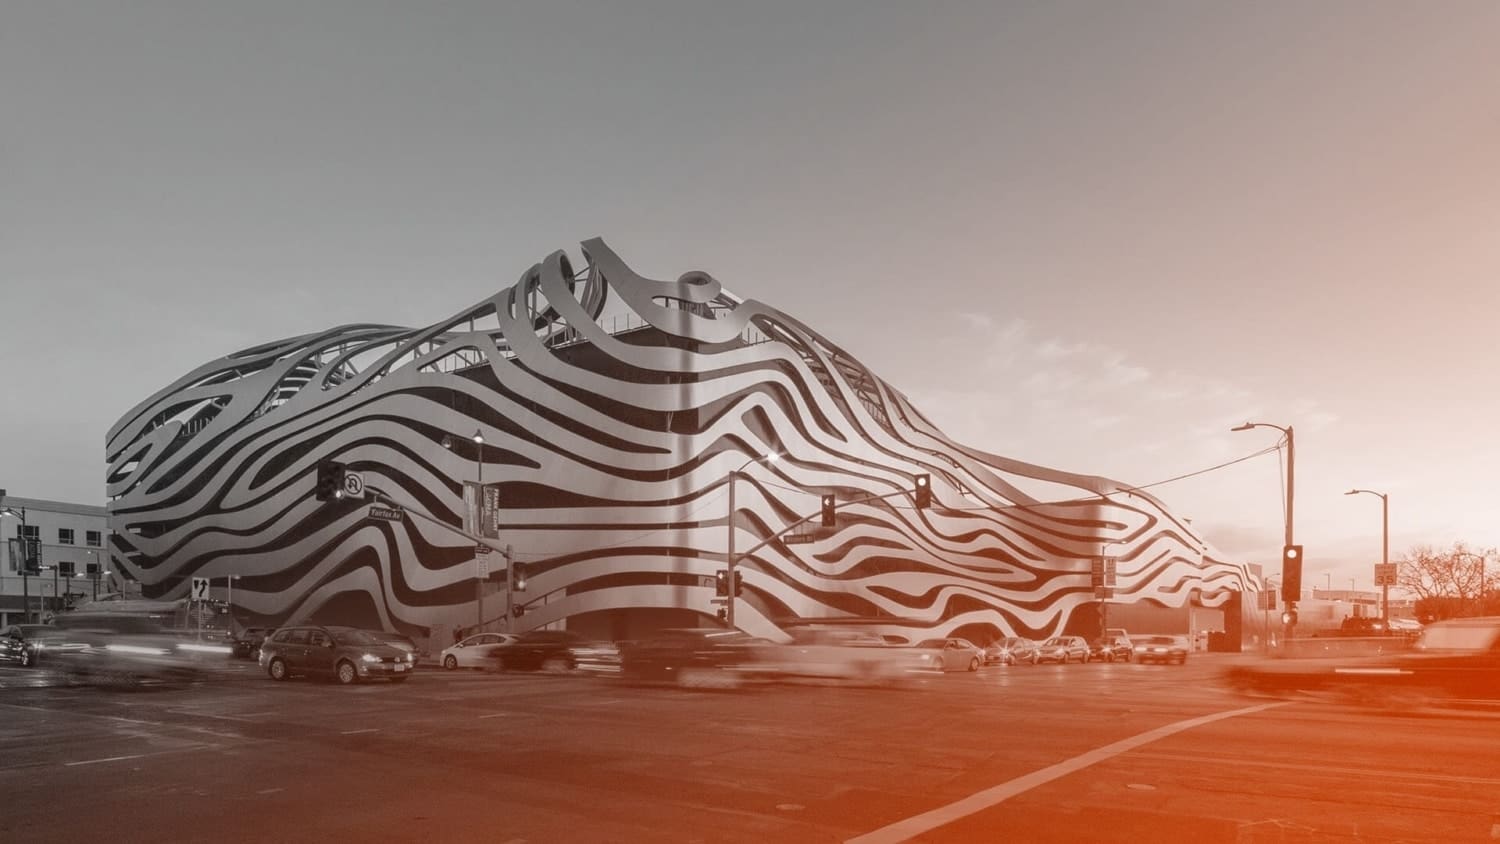 Design development for the Petersen Automotive Museum began in 2012. Principal Trent Tesch knew that the complex shapes would be best defined under a Design Assist contract with Zahner.